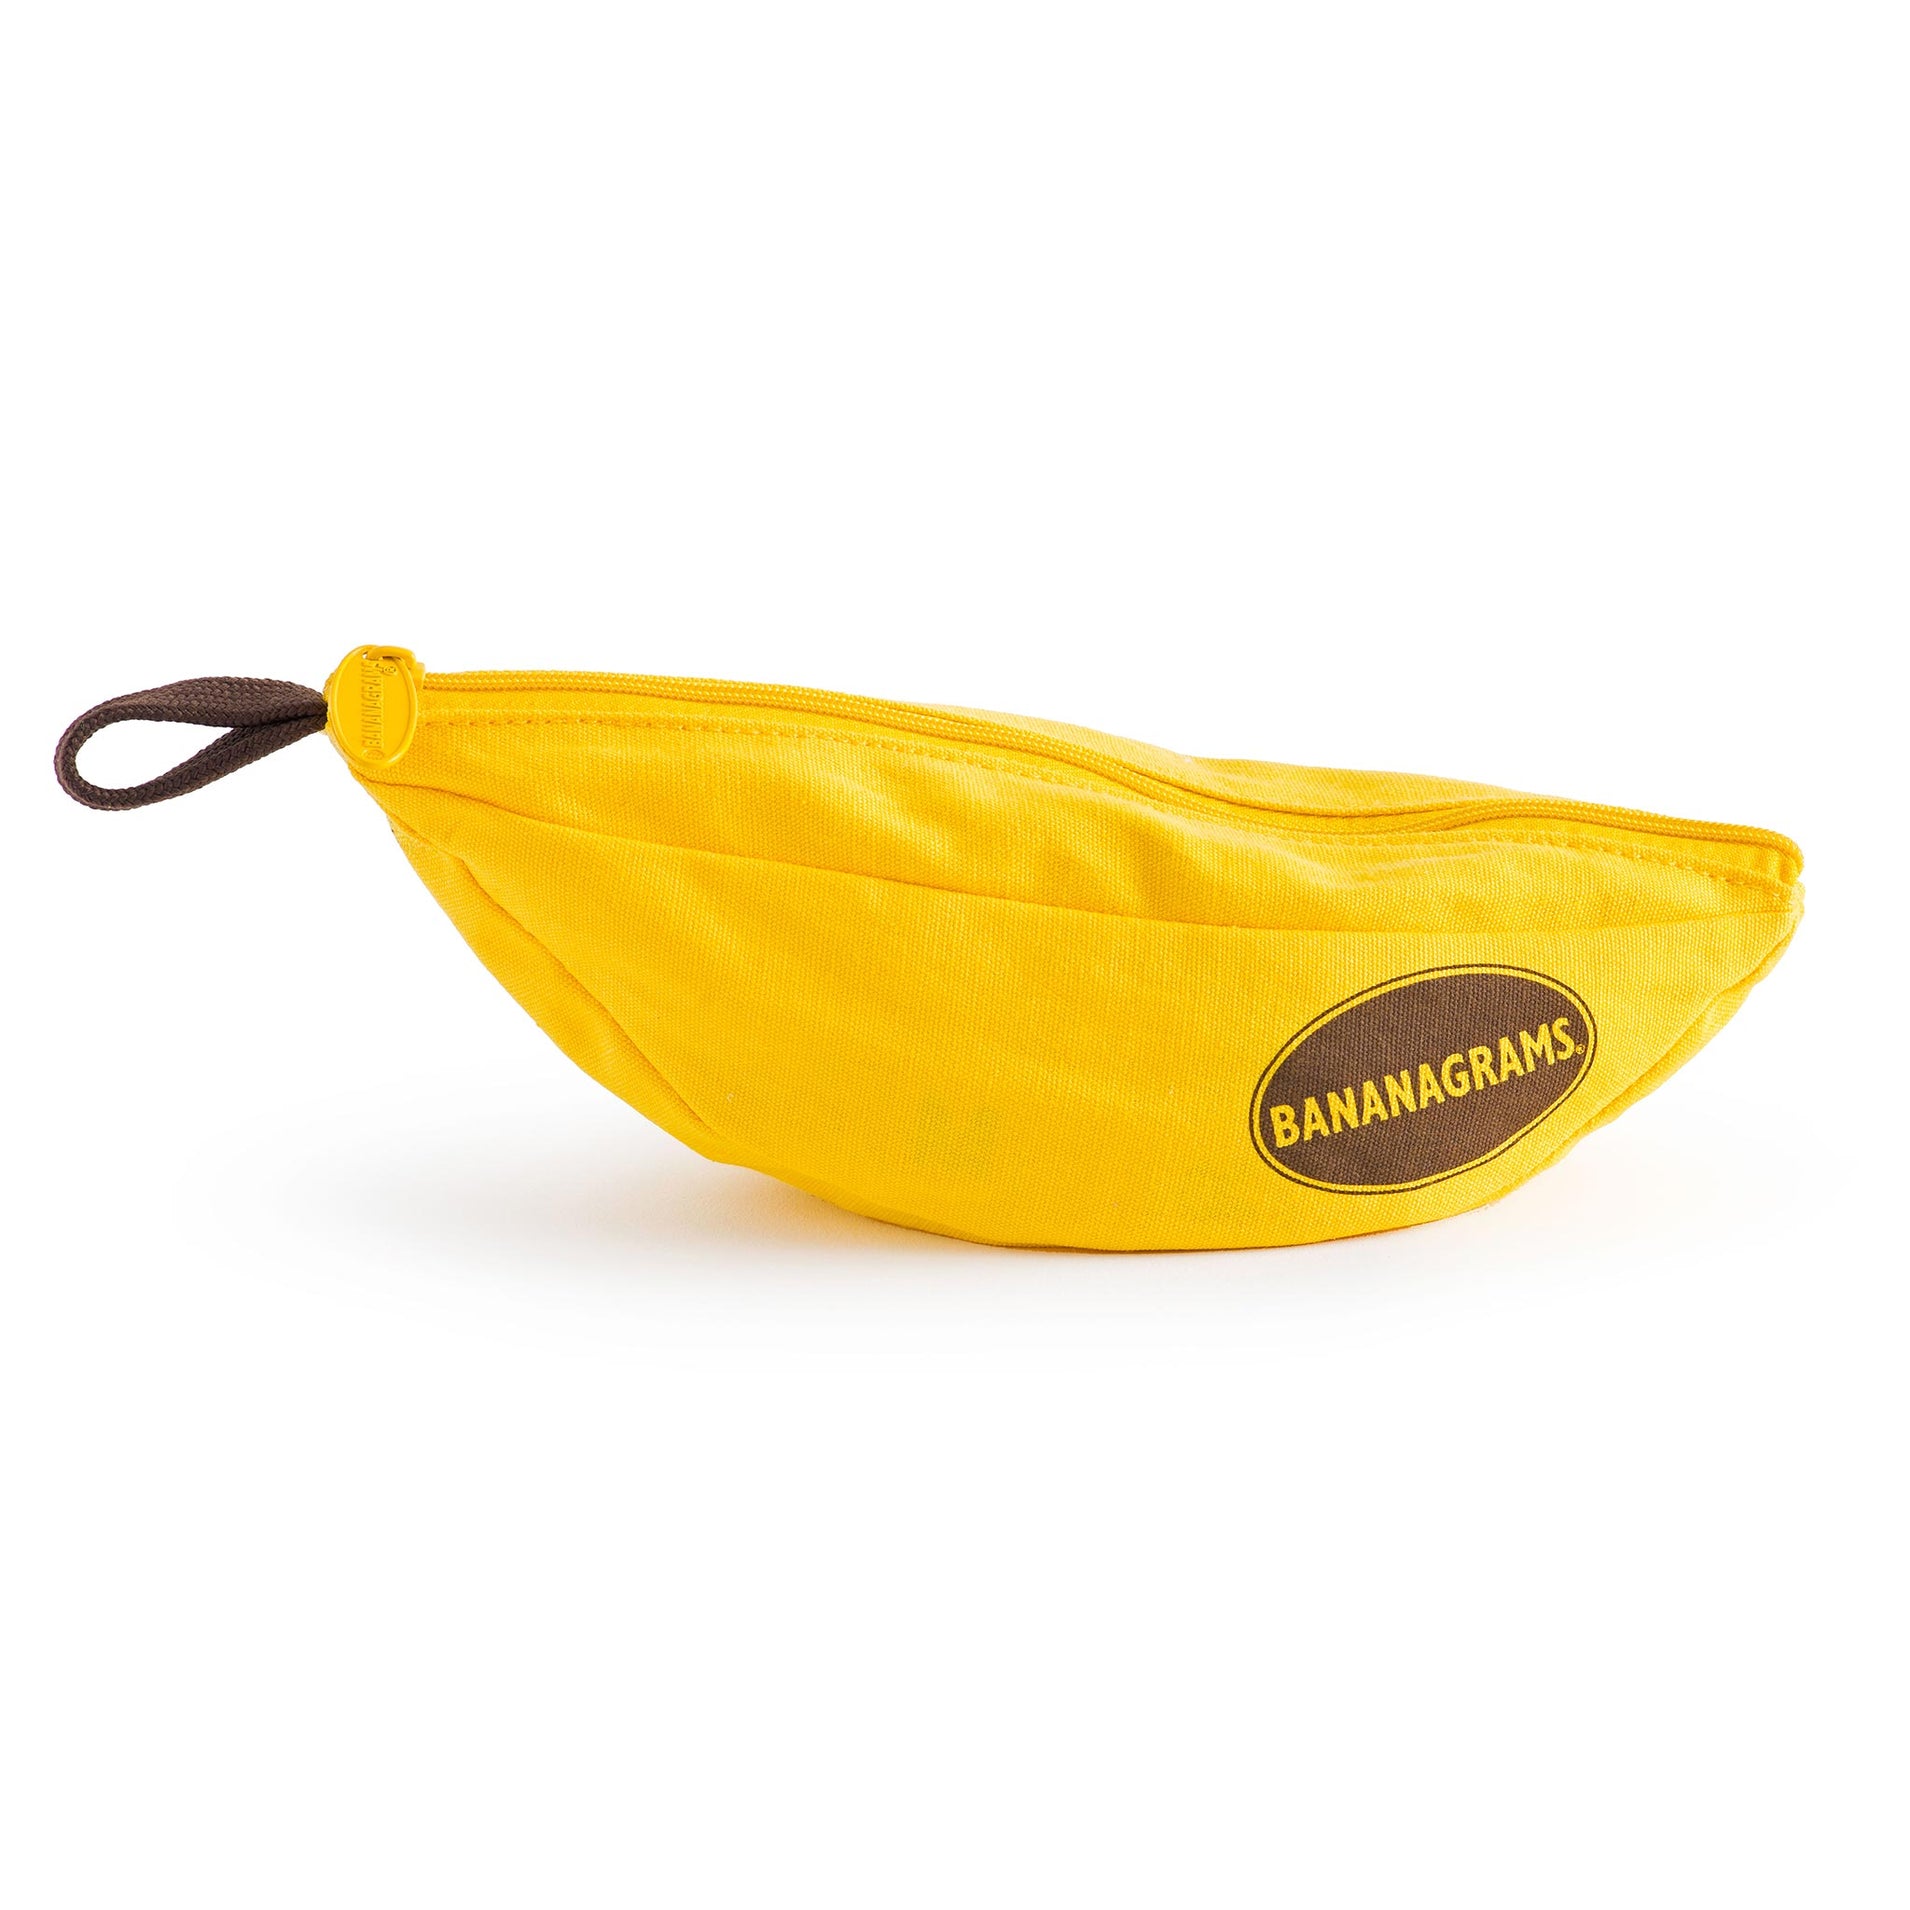 Classic BANANAGRAMS pouch